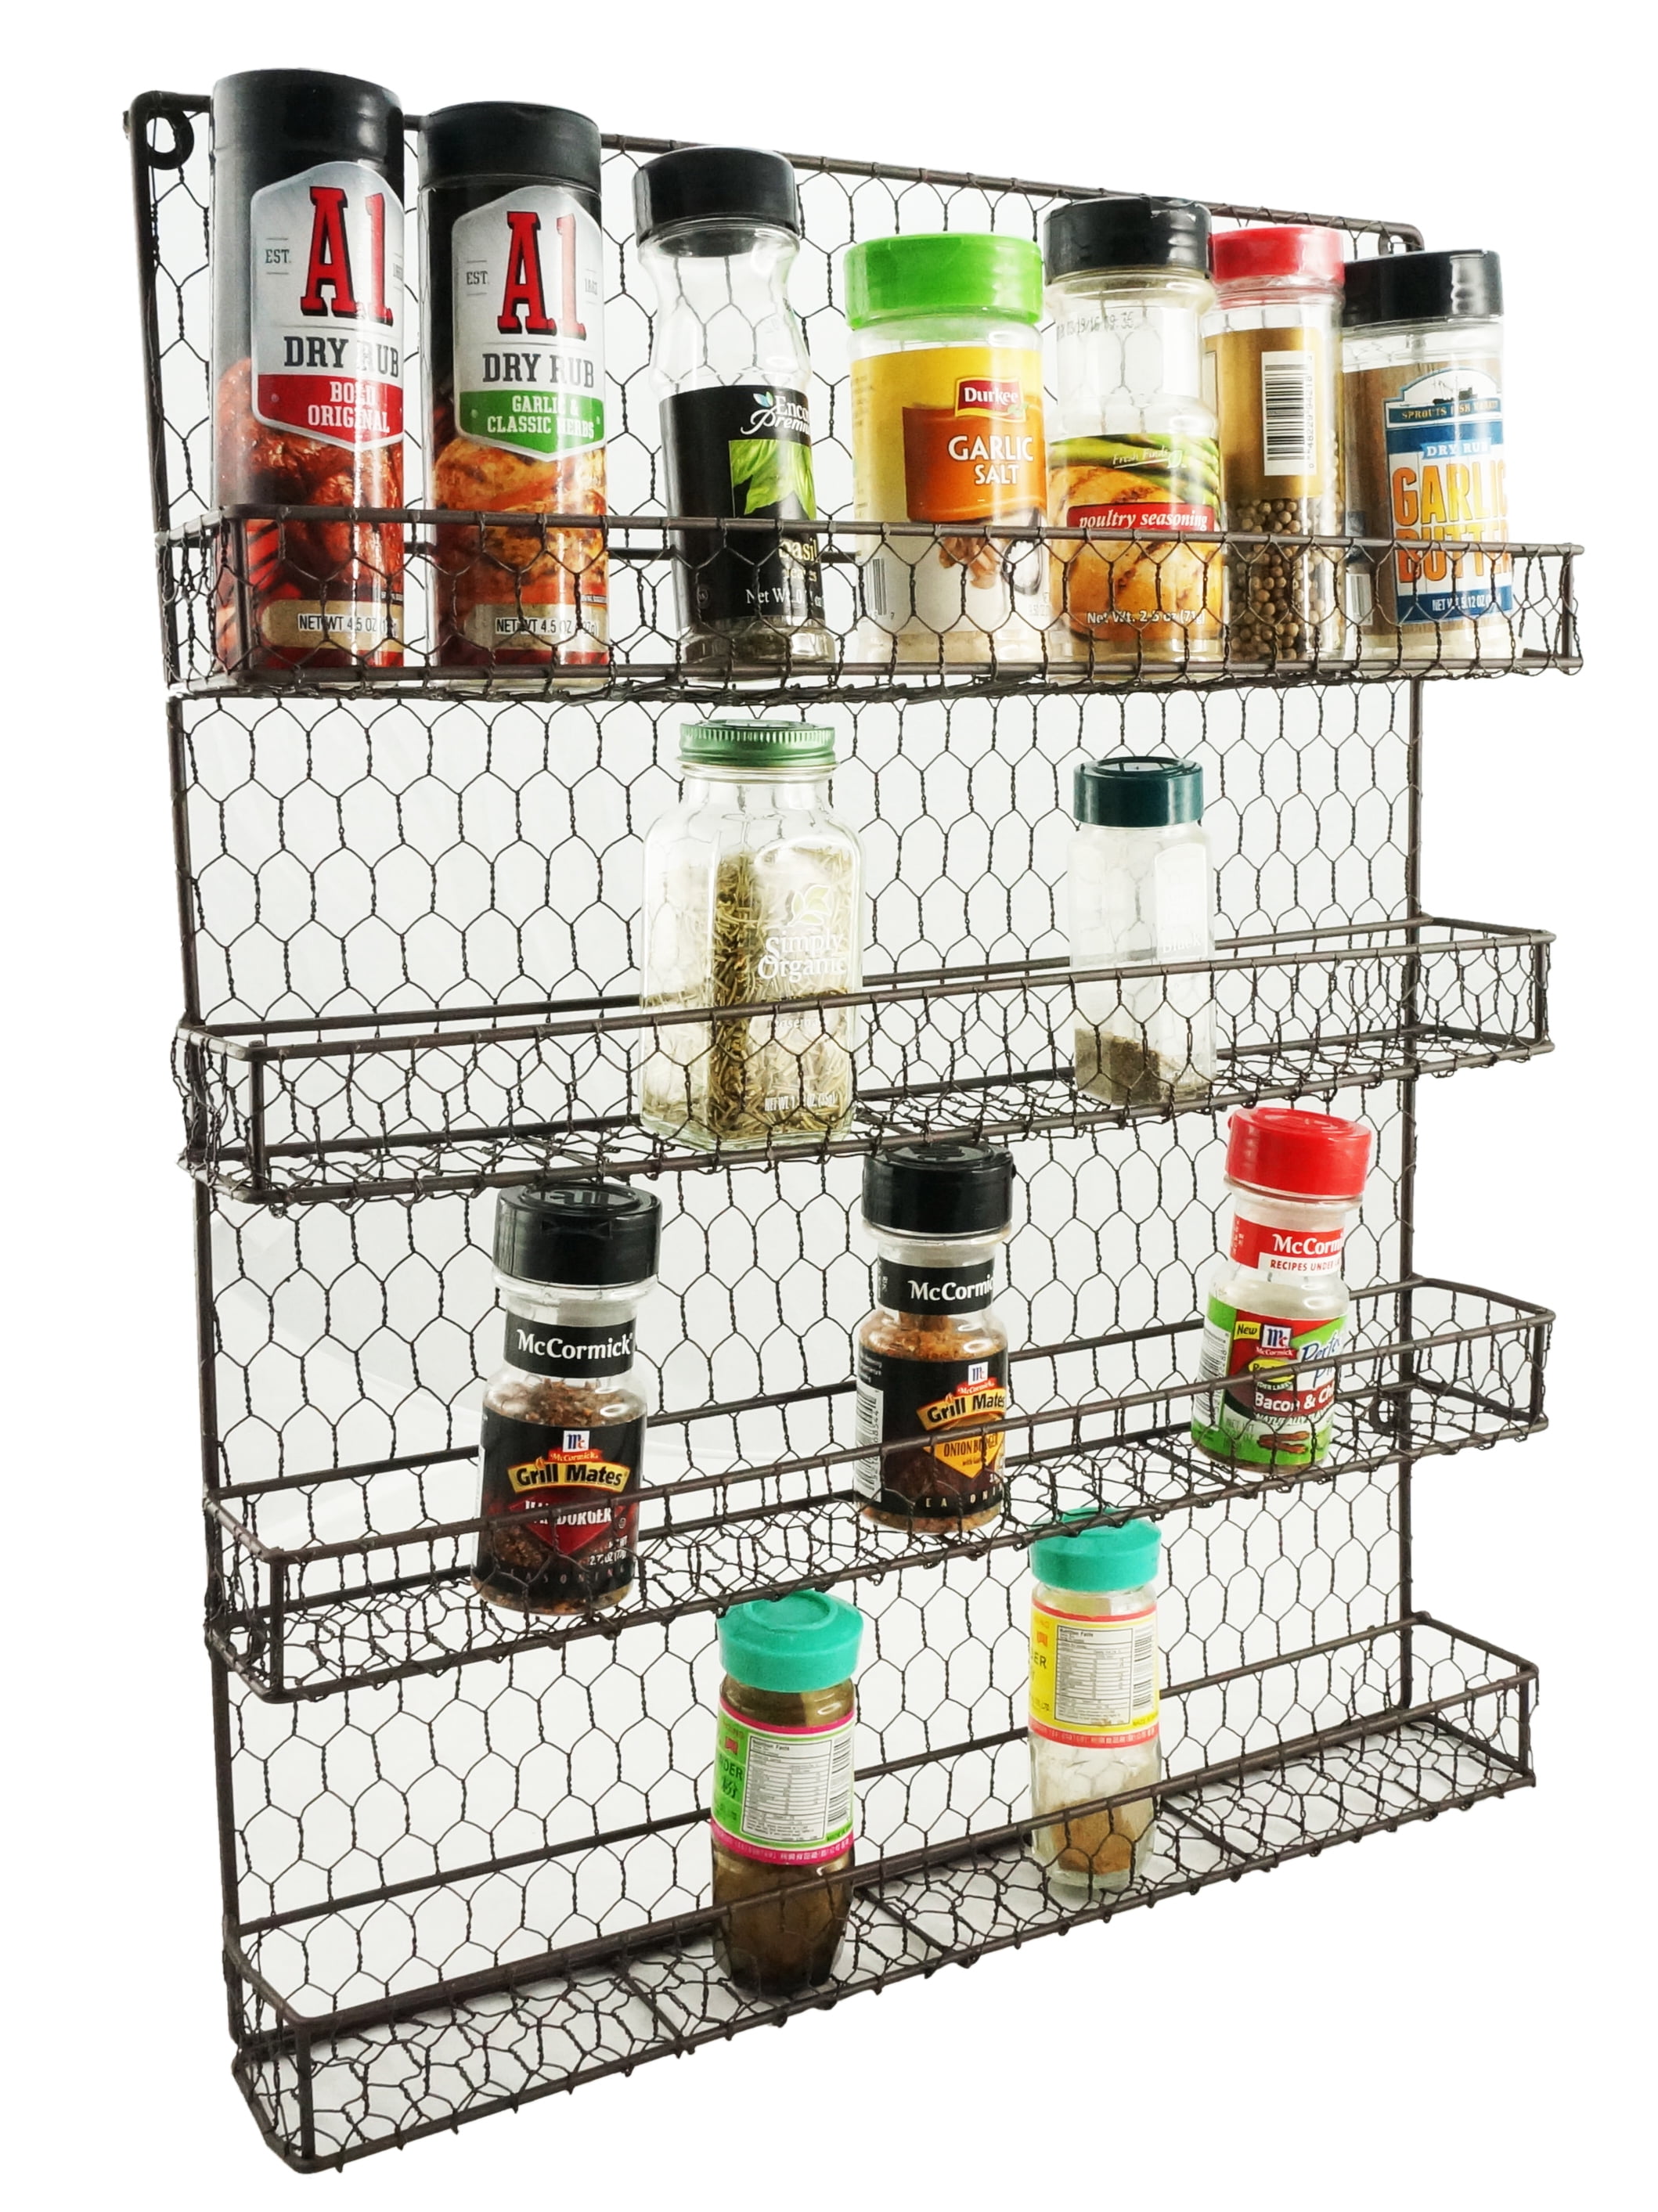 MyGift 4 Tier Black Country Rustic Chicken Wire Pantry, Cabinet or Wall Mounted Spice Rack Storage Organizer